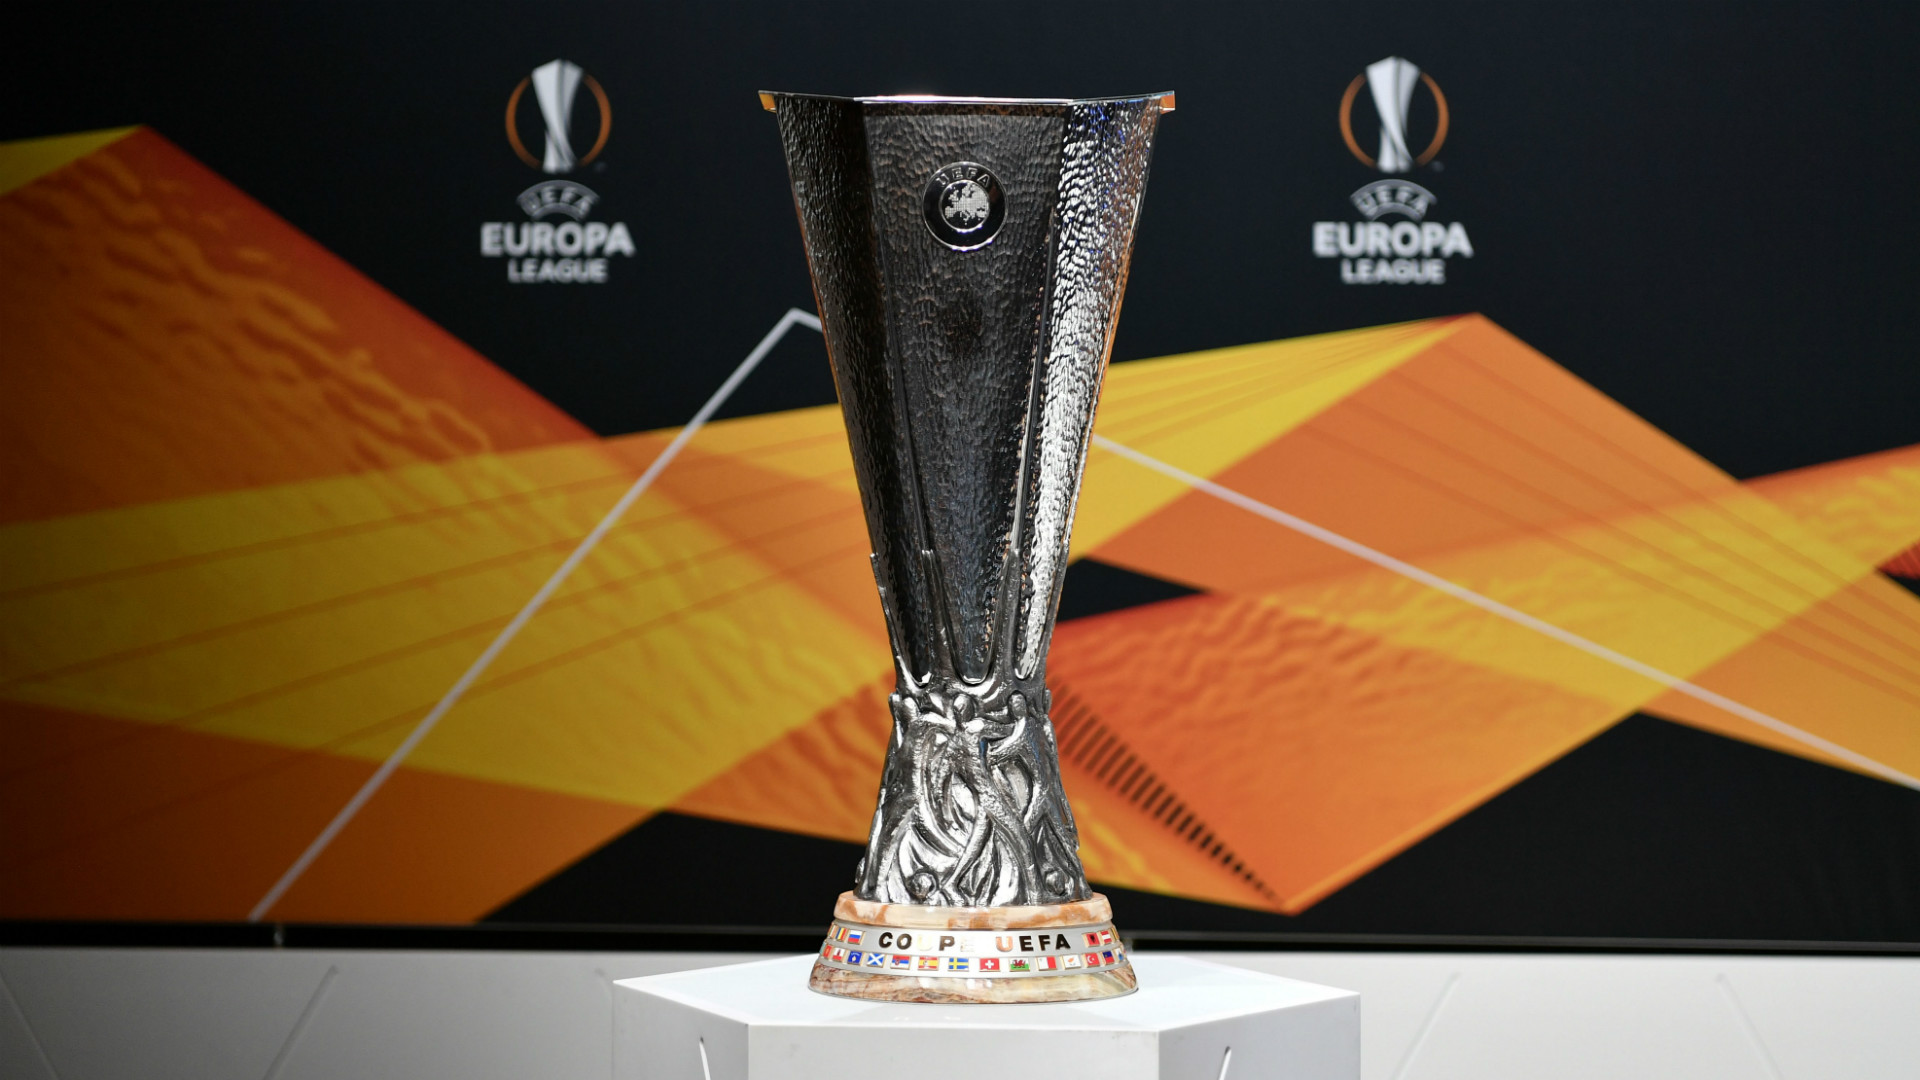 UEFA Europa League knockout round play-off draw - YouTube